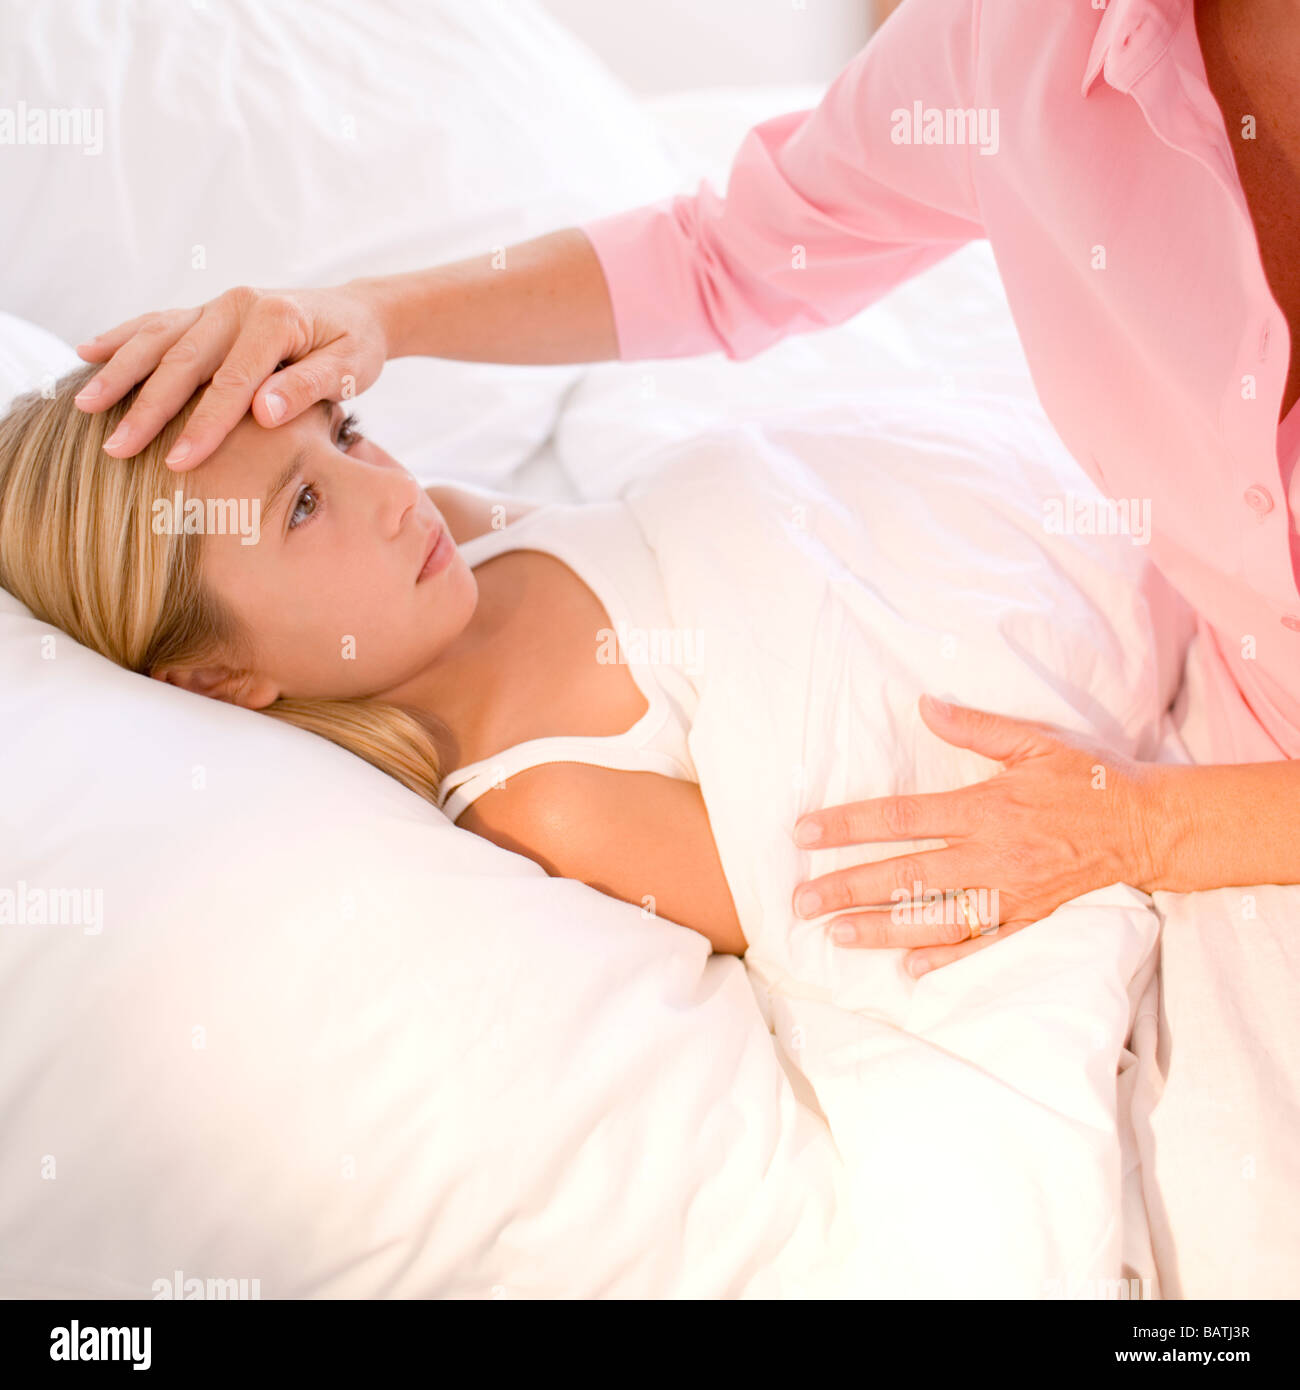 Ill child. Mother checking her daughter's temperature with her hand. Stock Photo